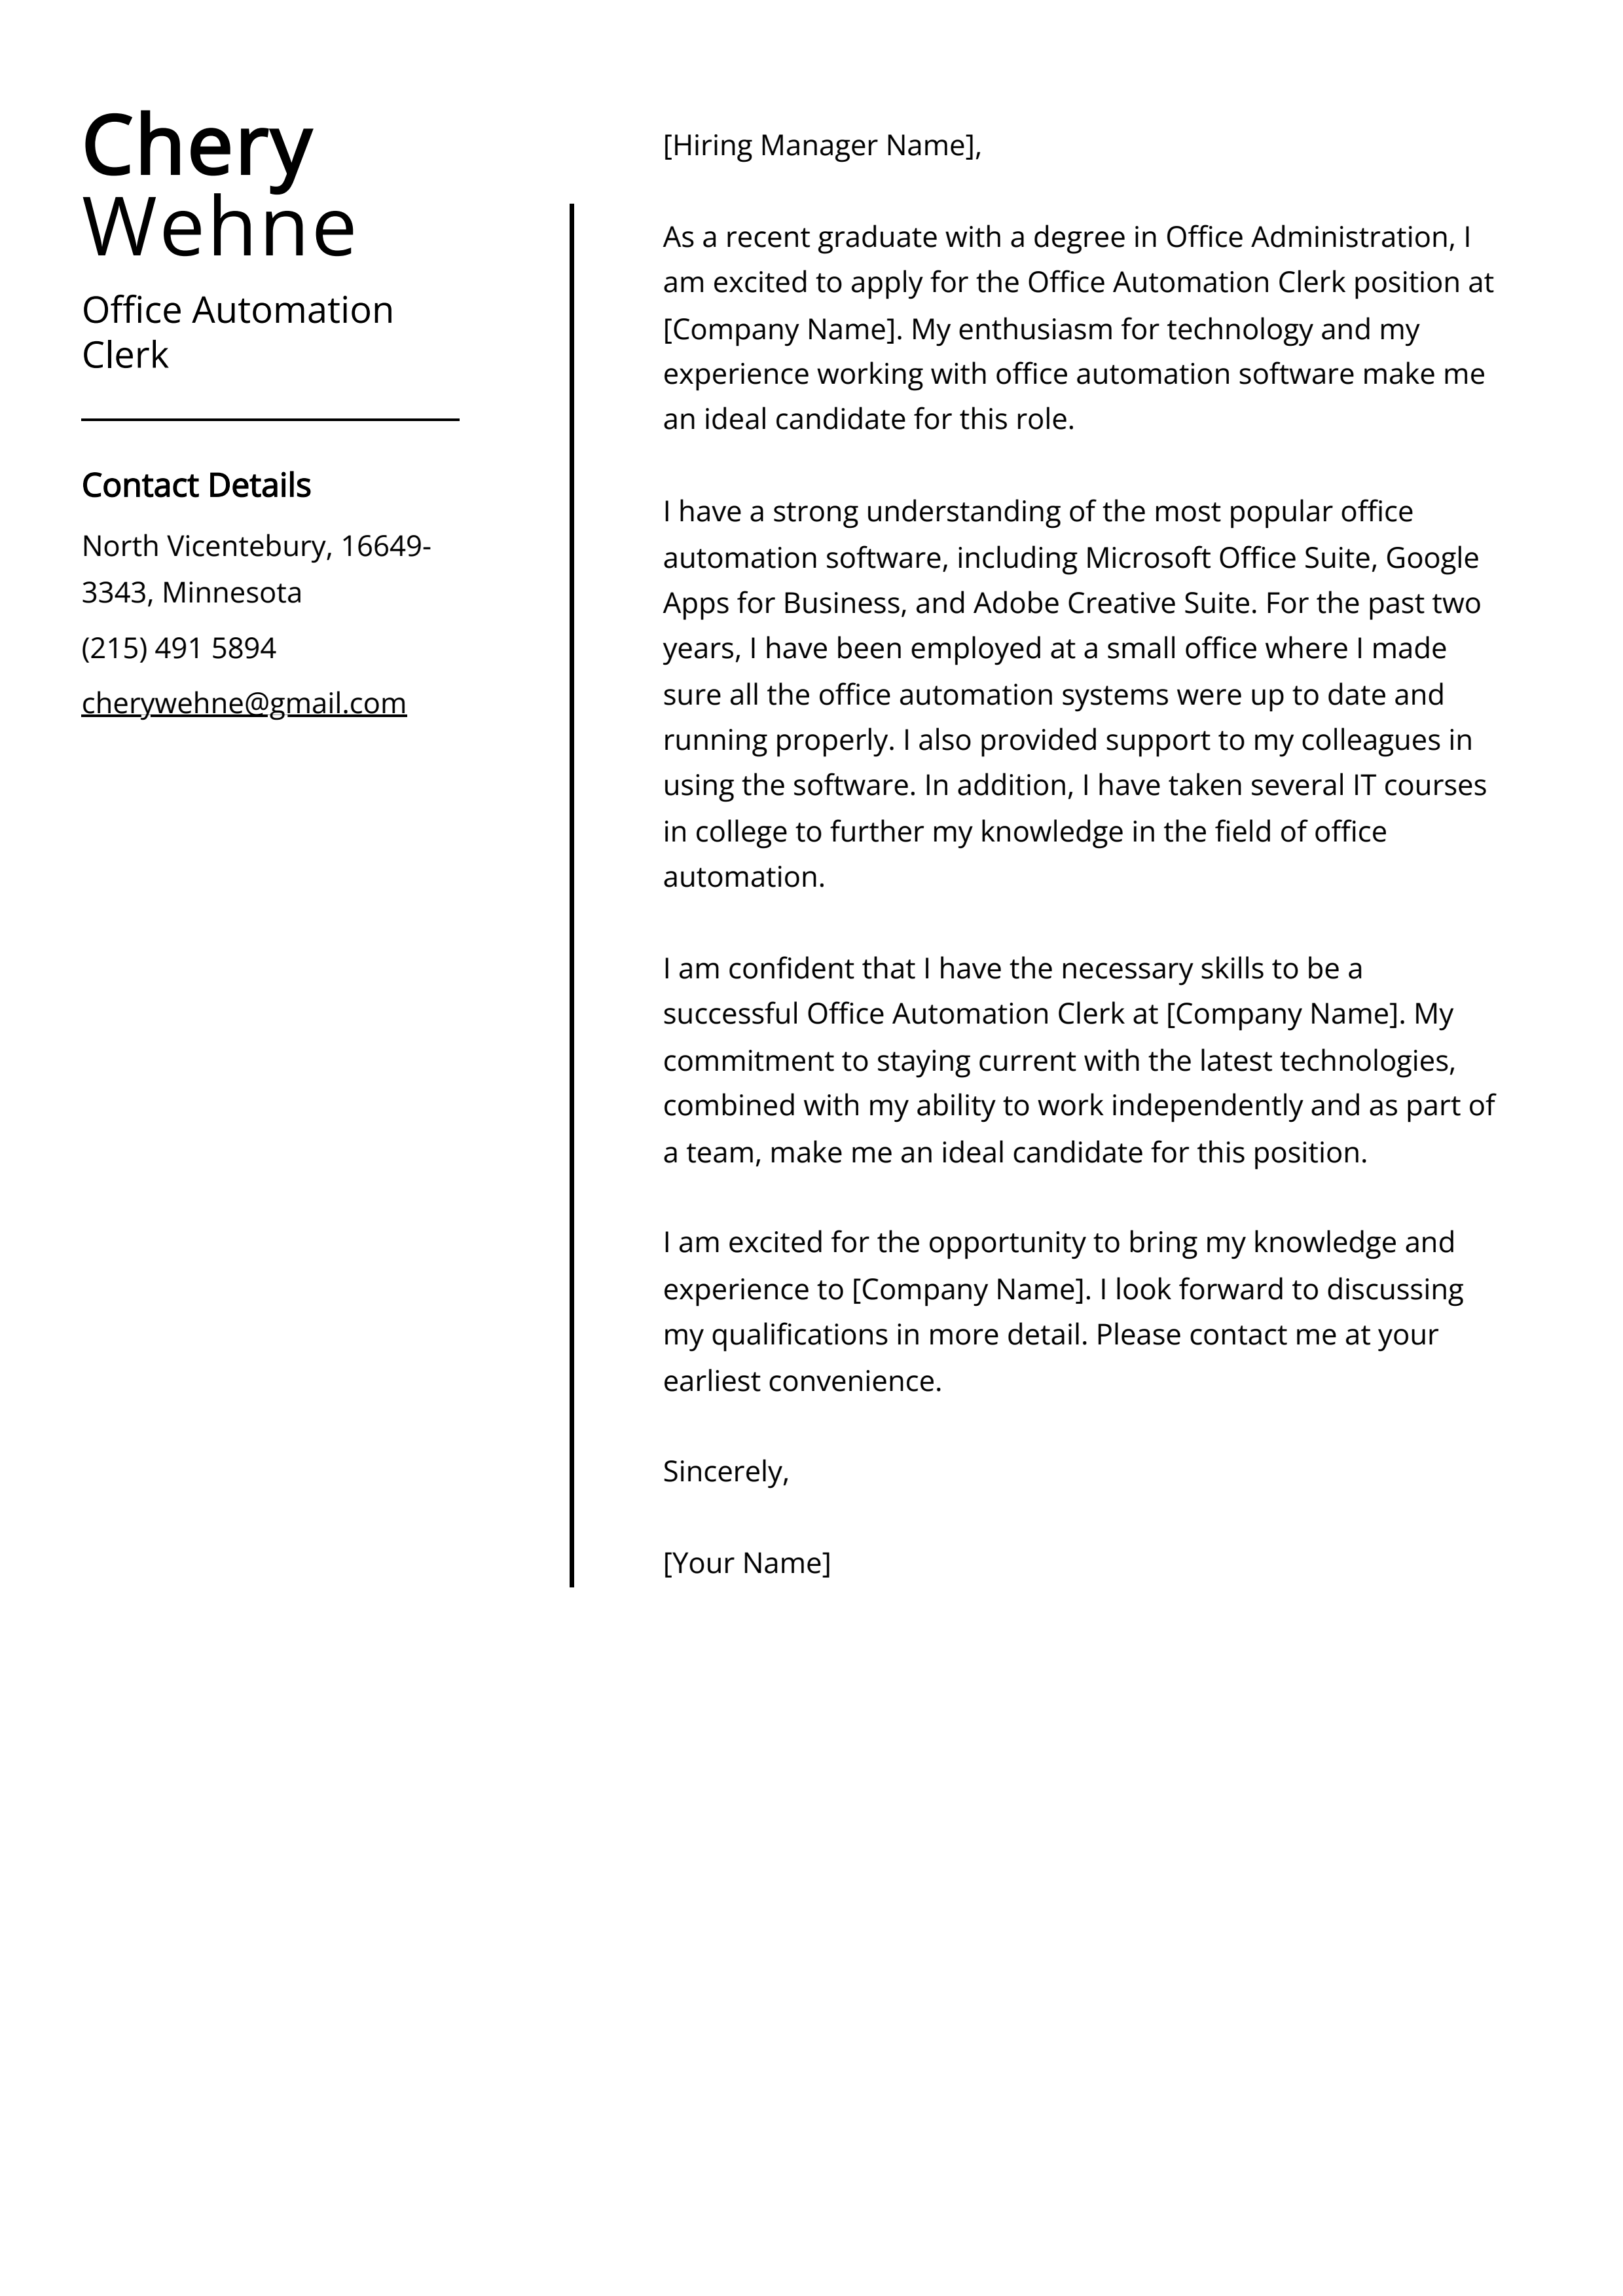 Office Automation Clerk Cover Letter Example